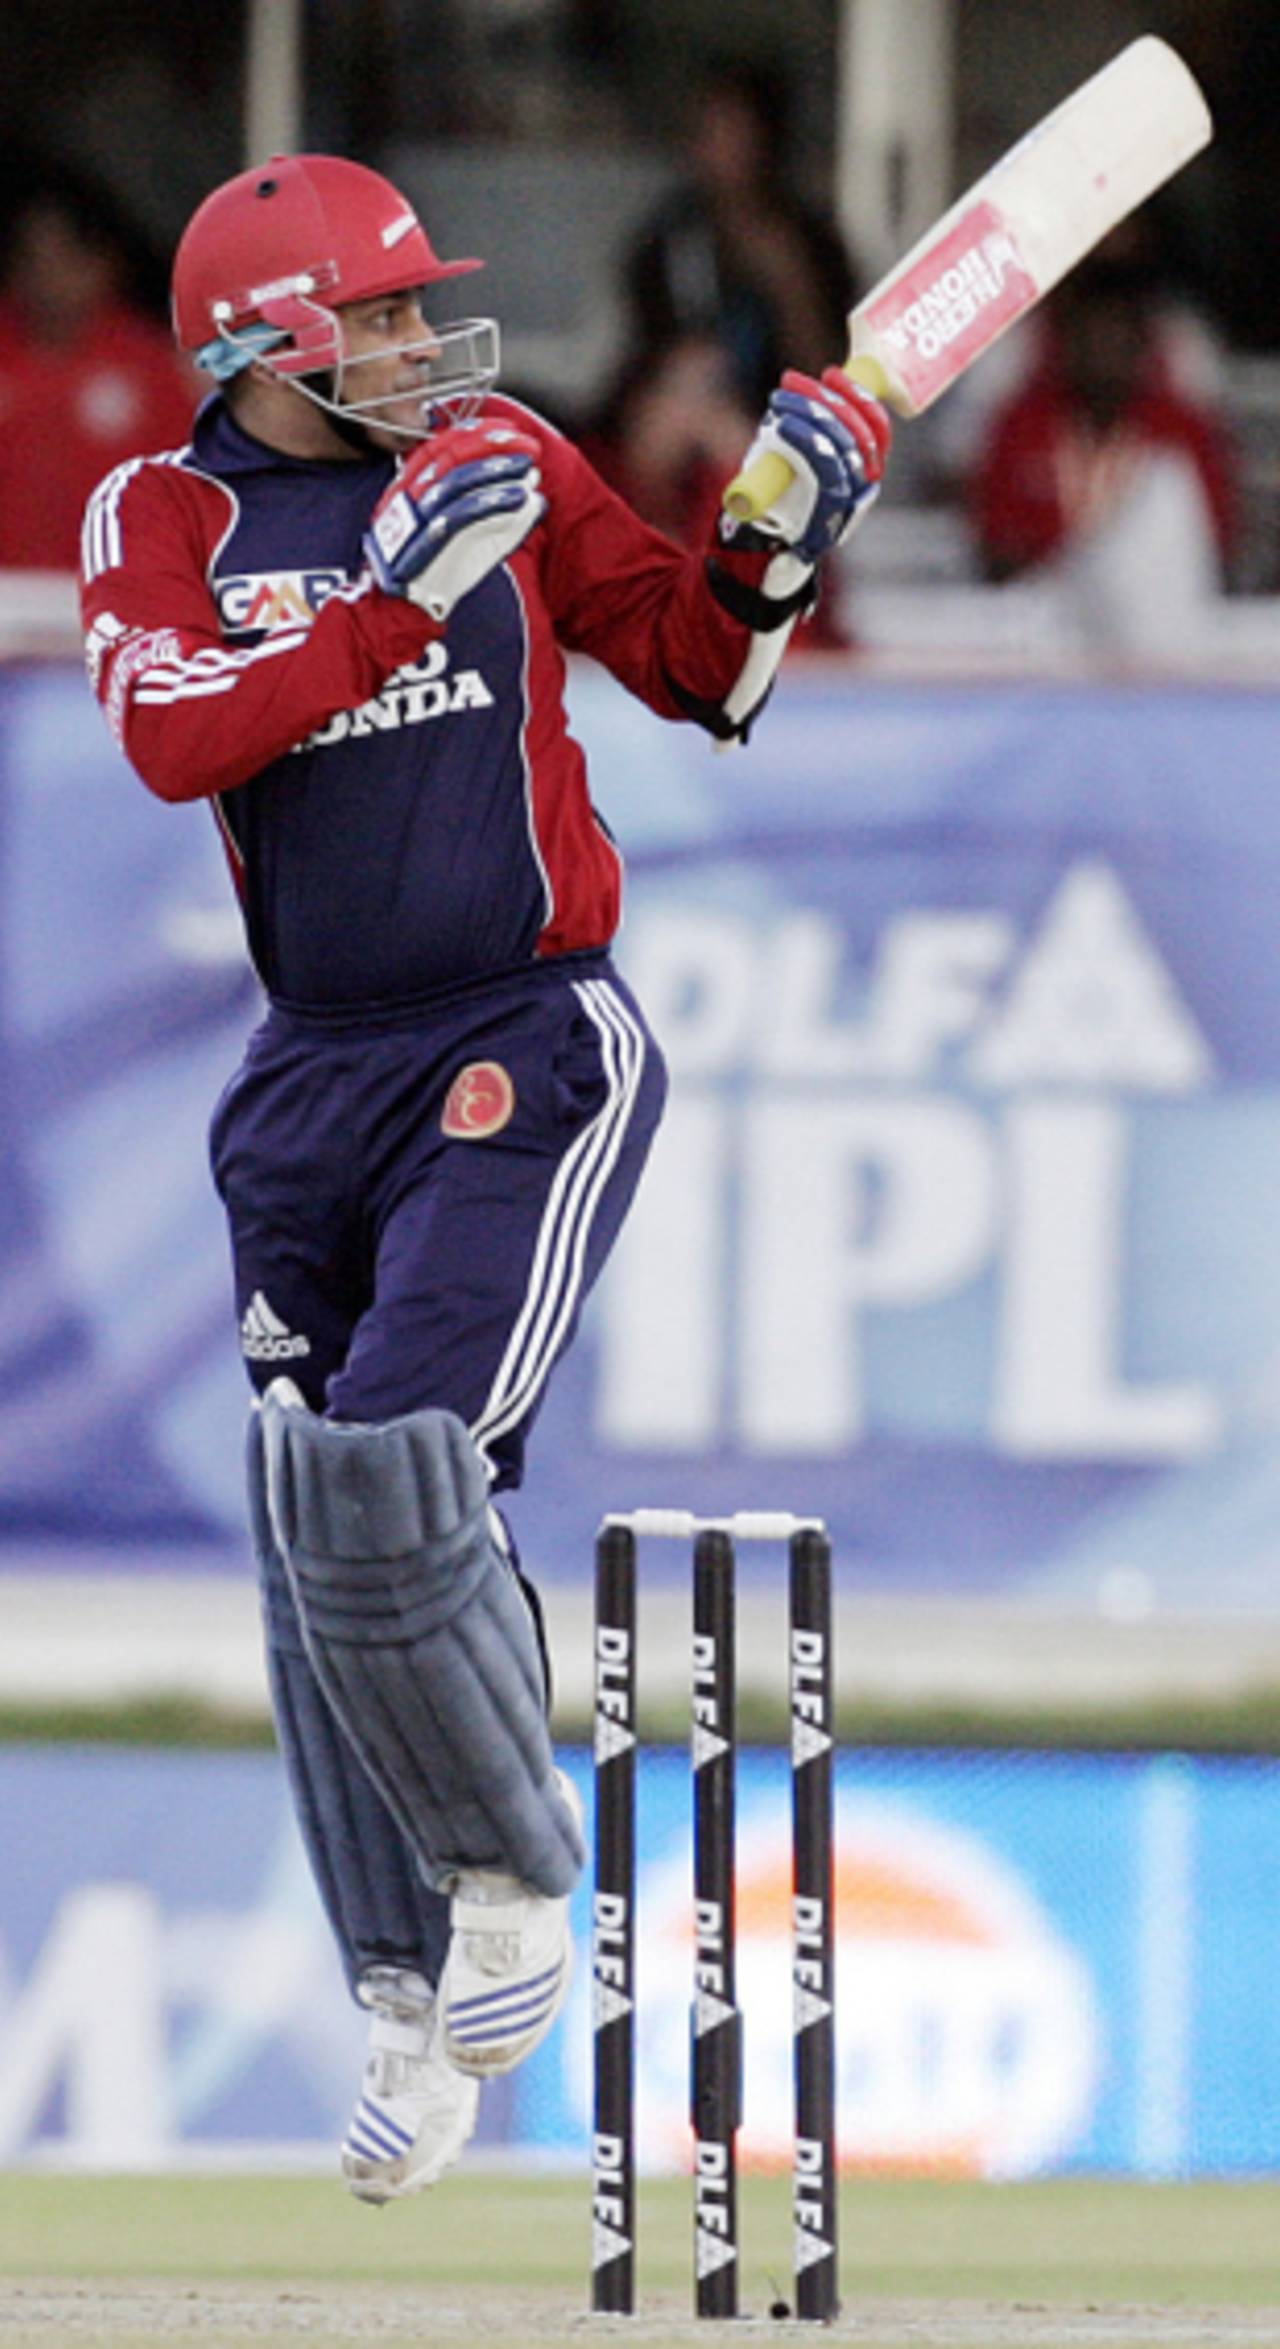 Virender Sehwag in a spot of bother as he turns it towards long leg, Delhi Daredevils v Kings XI Punjab, 46th match, IPL, Bloemfontein, May 15, 2009